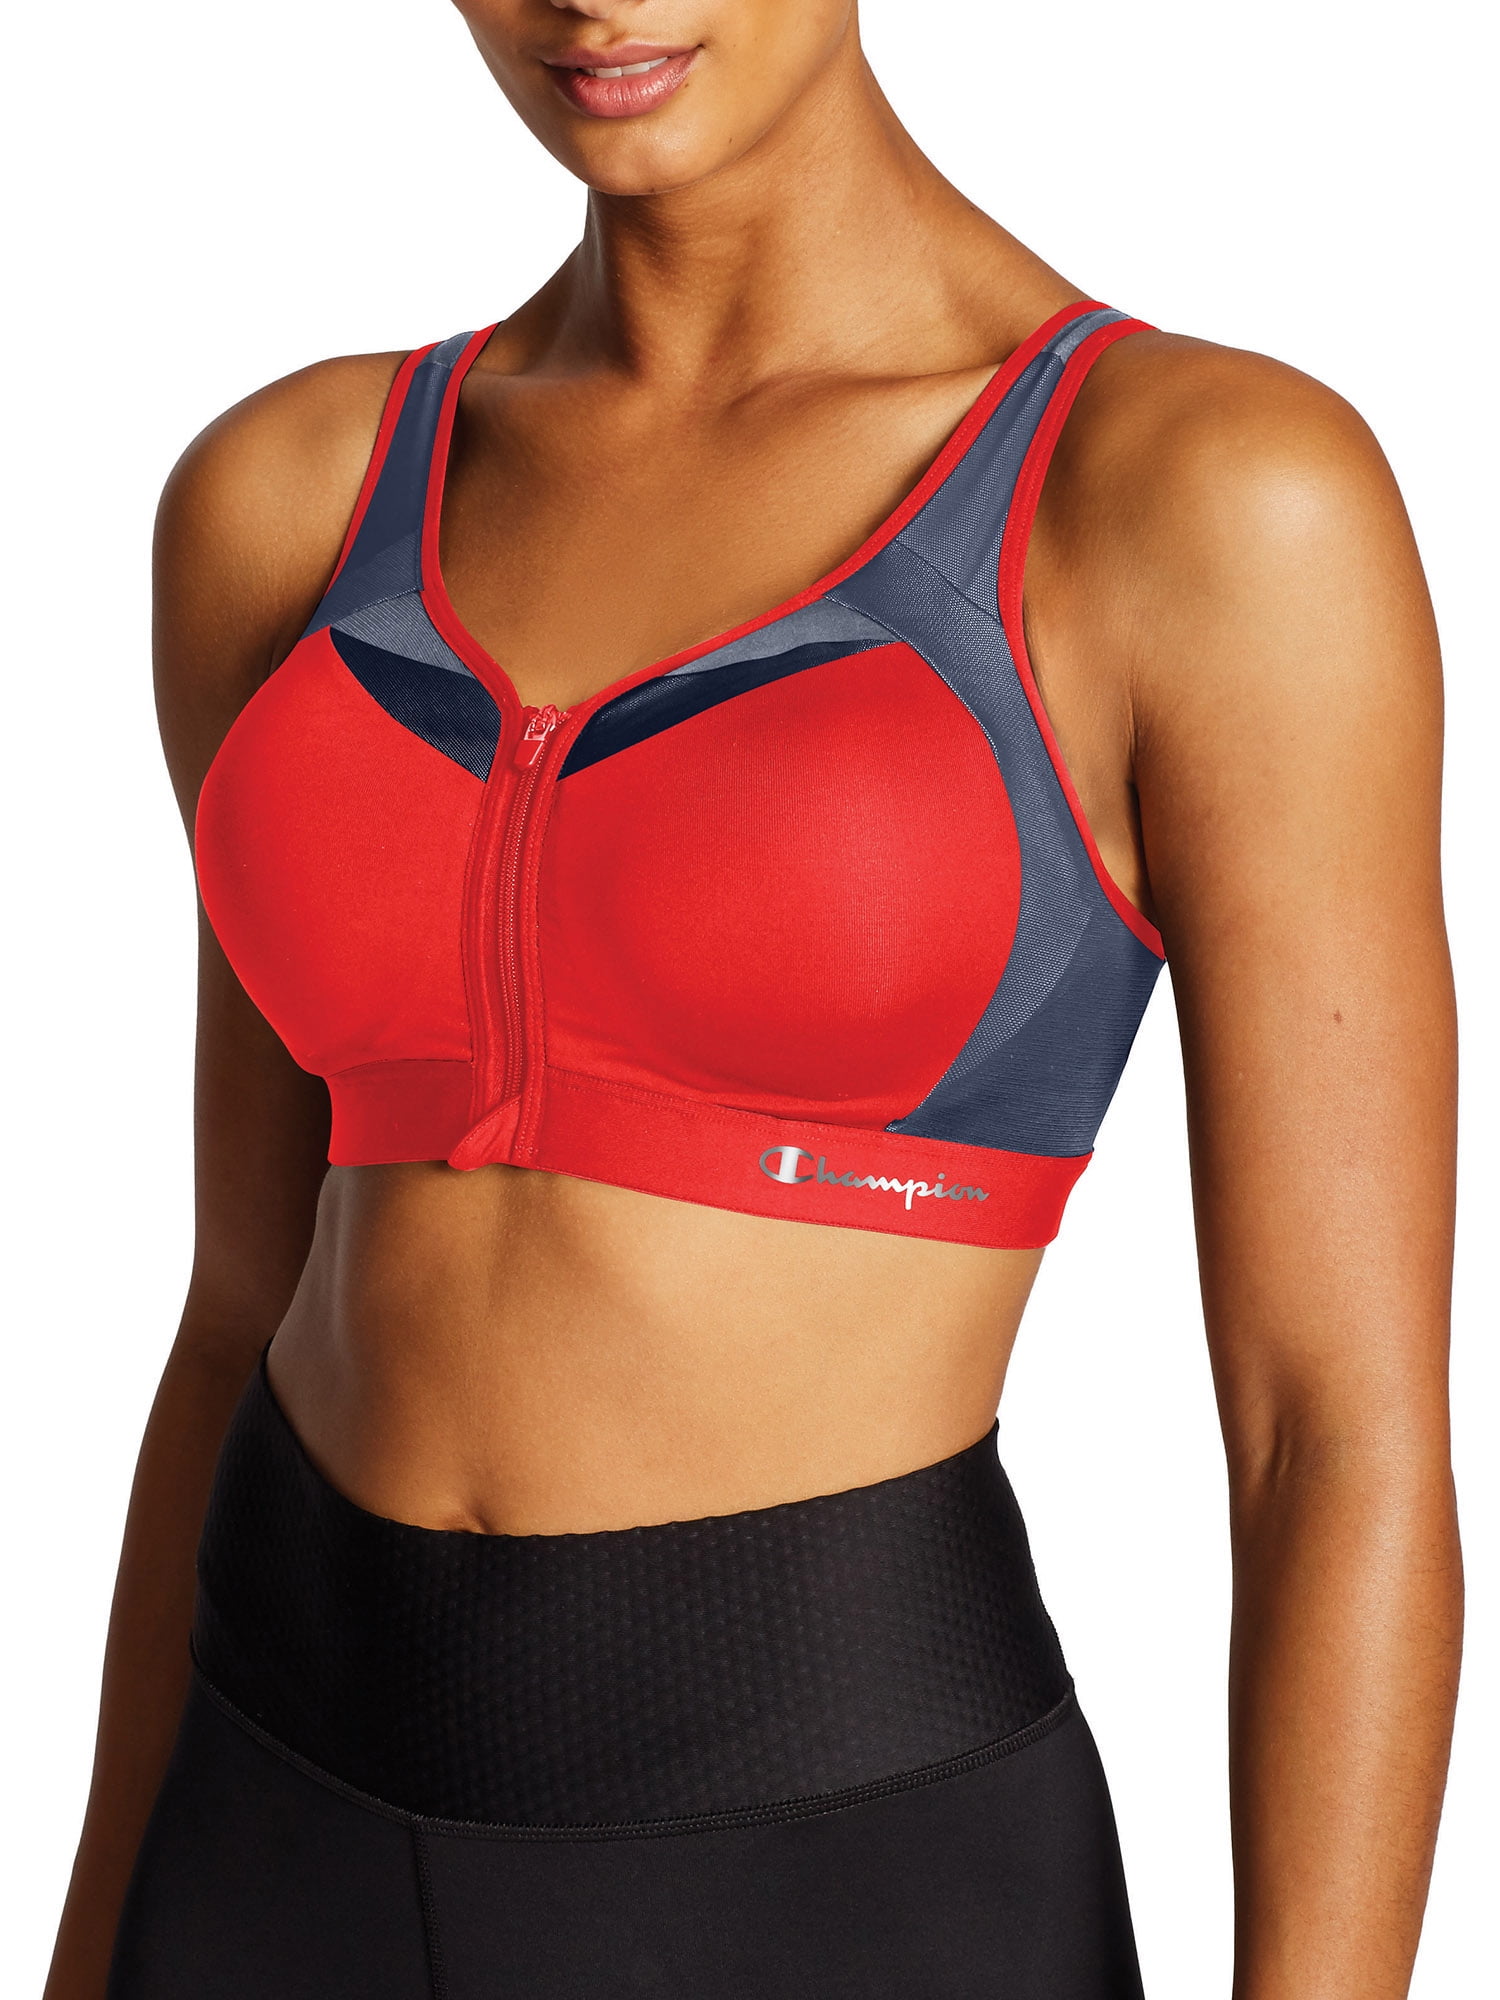 Women's Champion Motion Control Zip Front Sports Bra Red Flame 42C